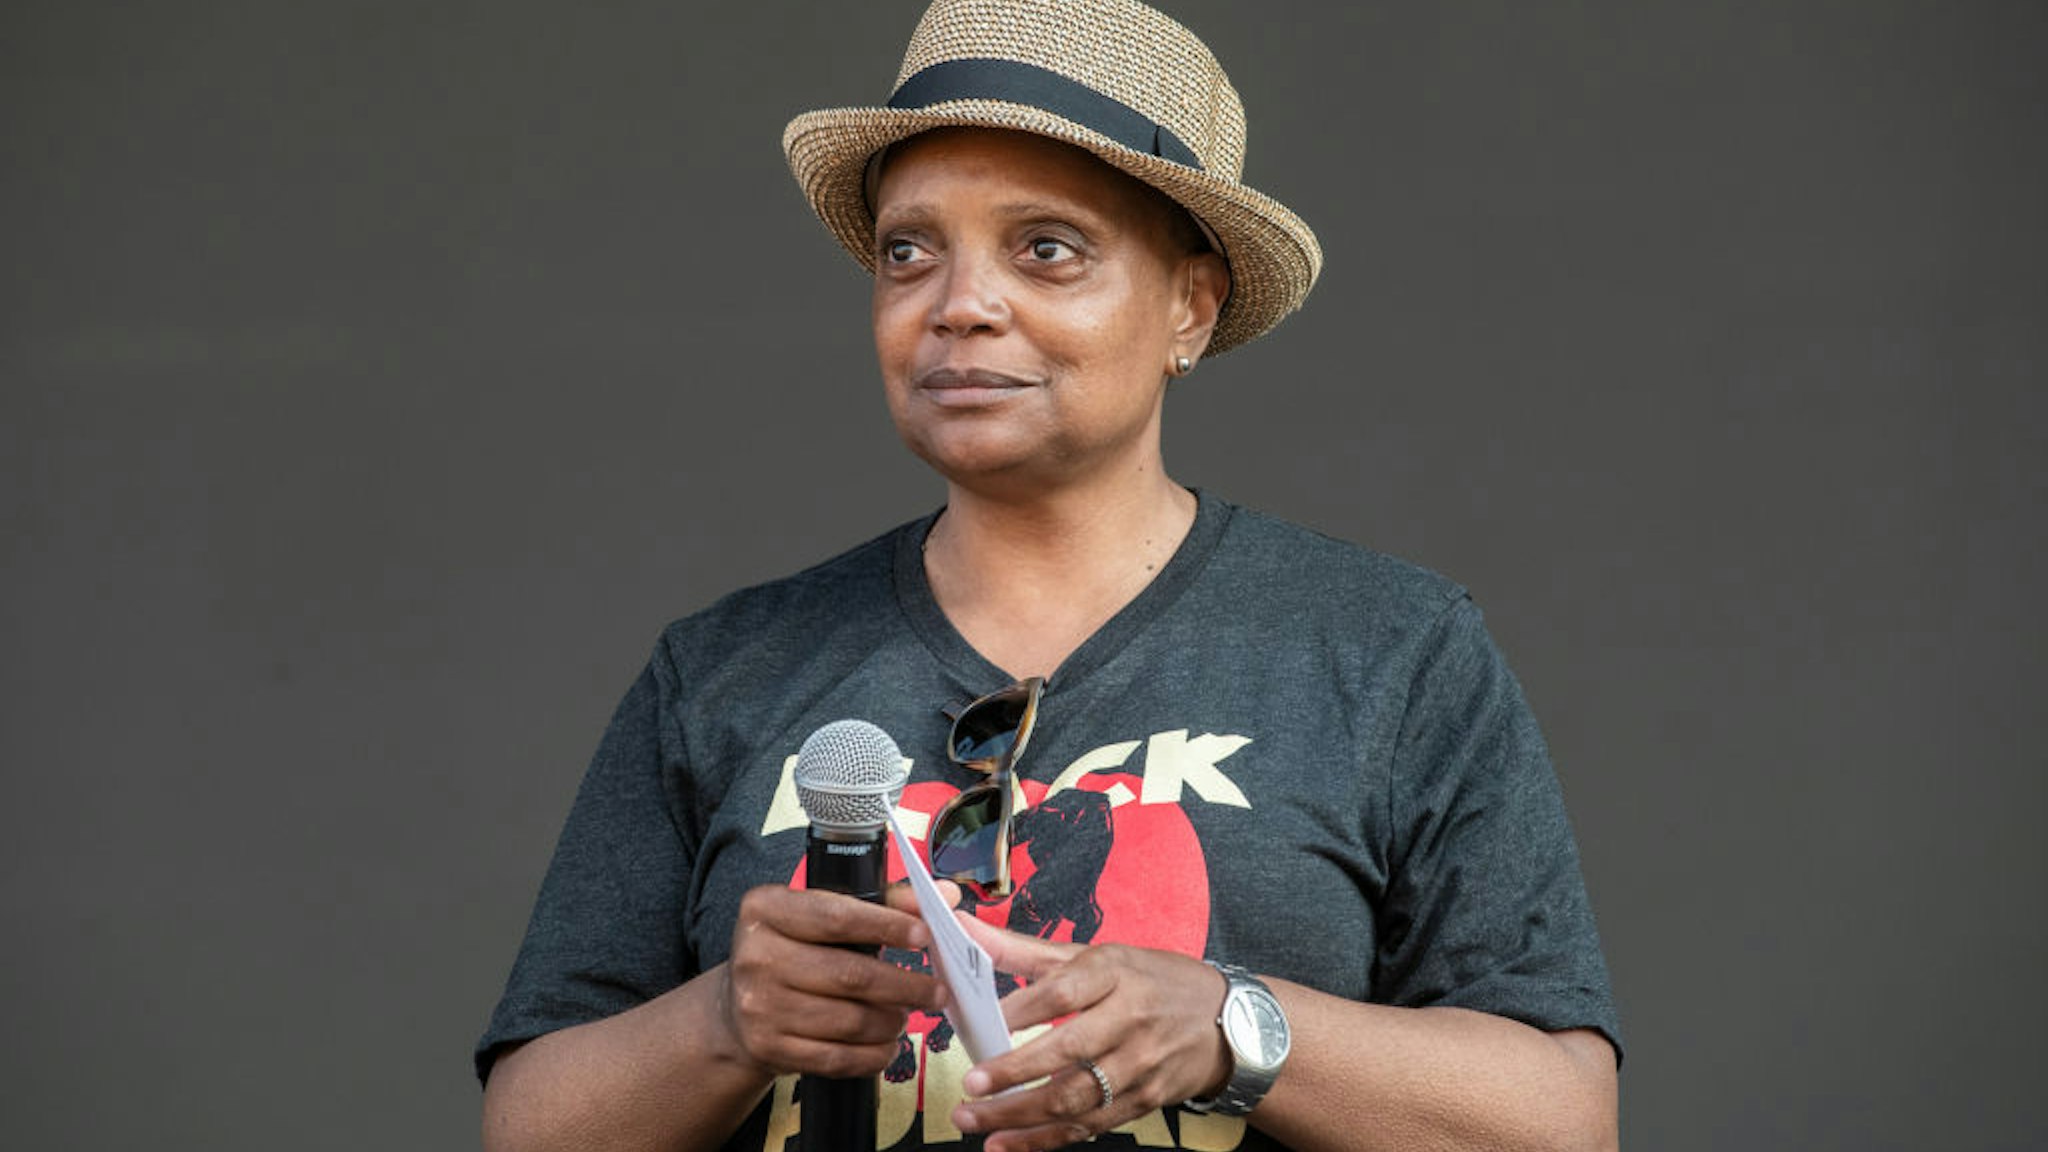 CHICAGO, ILLINOIS - JULY 29: Chicago Mayor Lori Lightfoot appears on stage during Lollapalooza 2021 at Grant Park on July 29, 2021 in Chicago, Illinois. (Photo by Timothy Hiatt/WireImage)